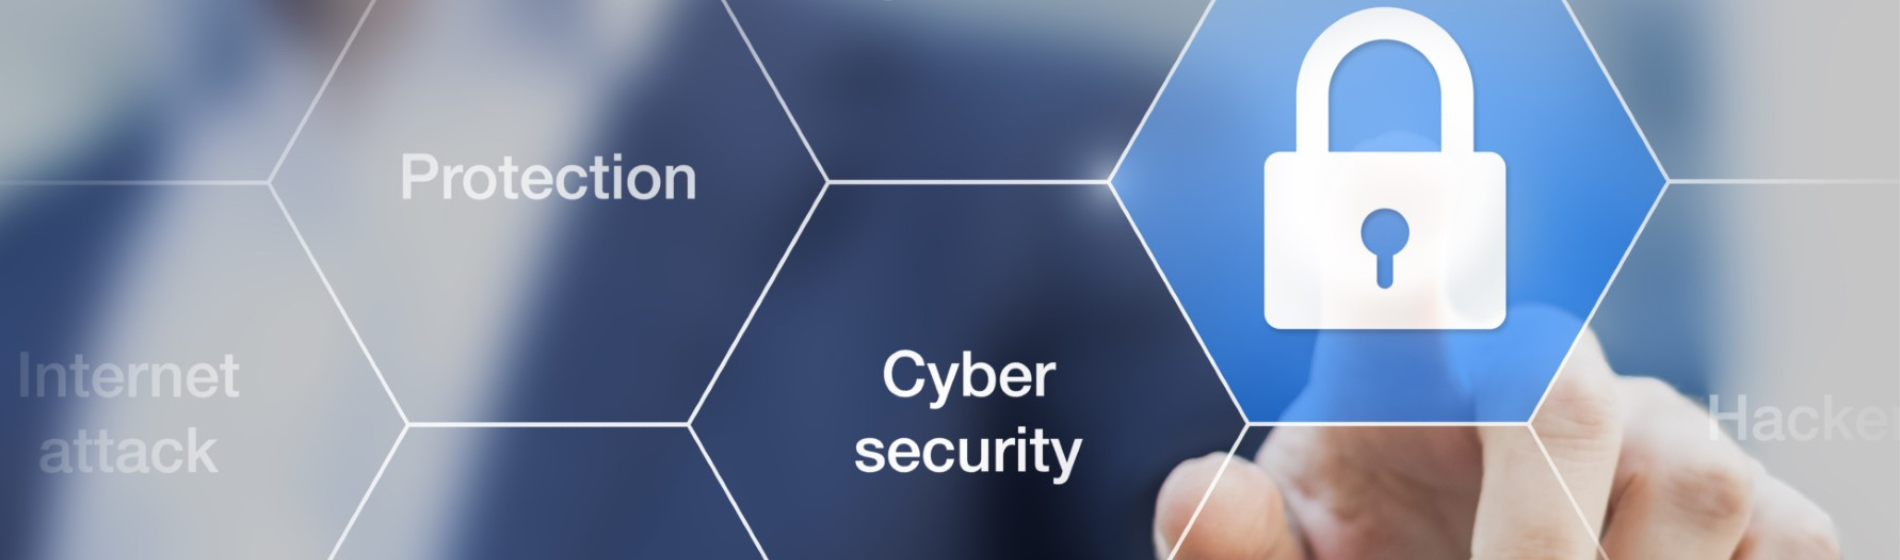 Cybersecurity (1900 × 560 px)